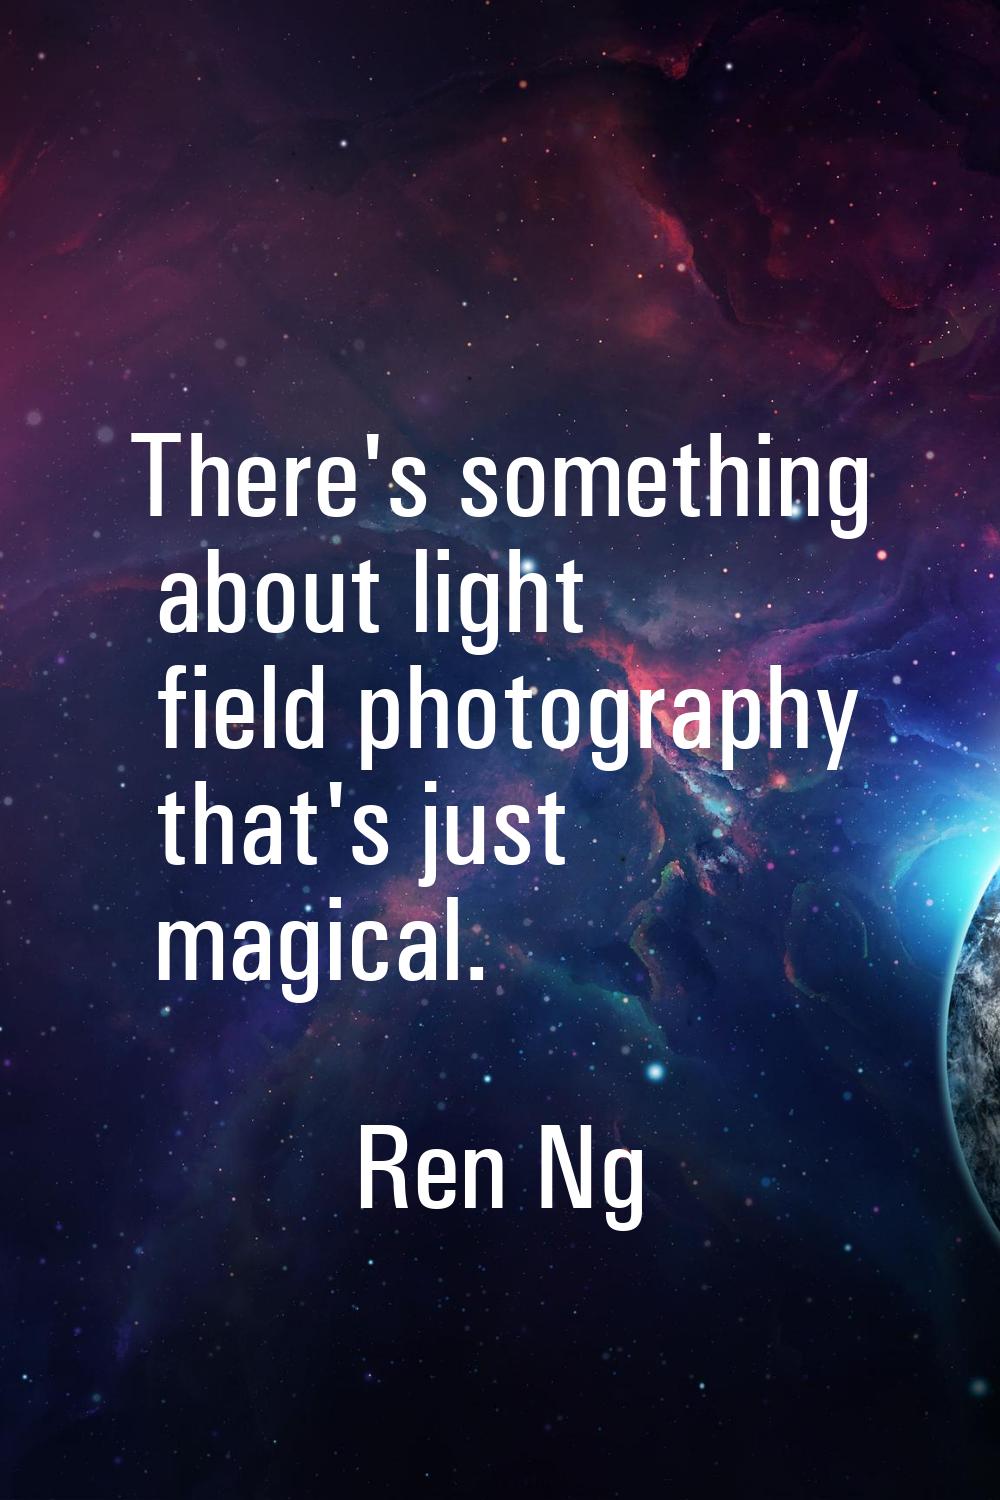 There's something about light field photography that's just magical.